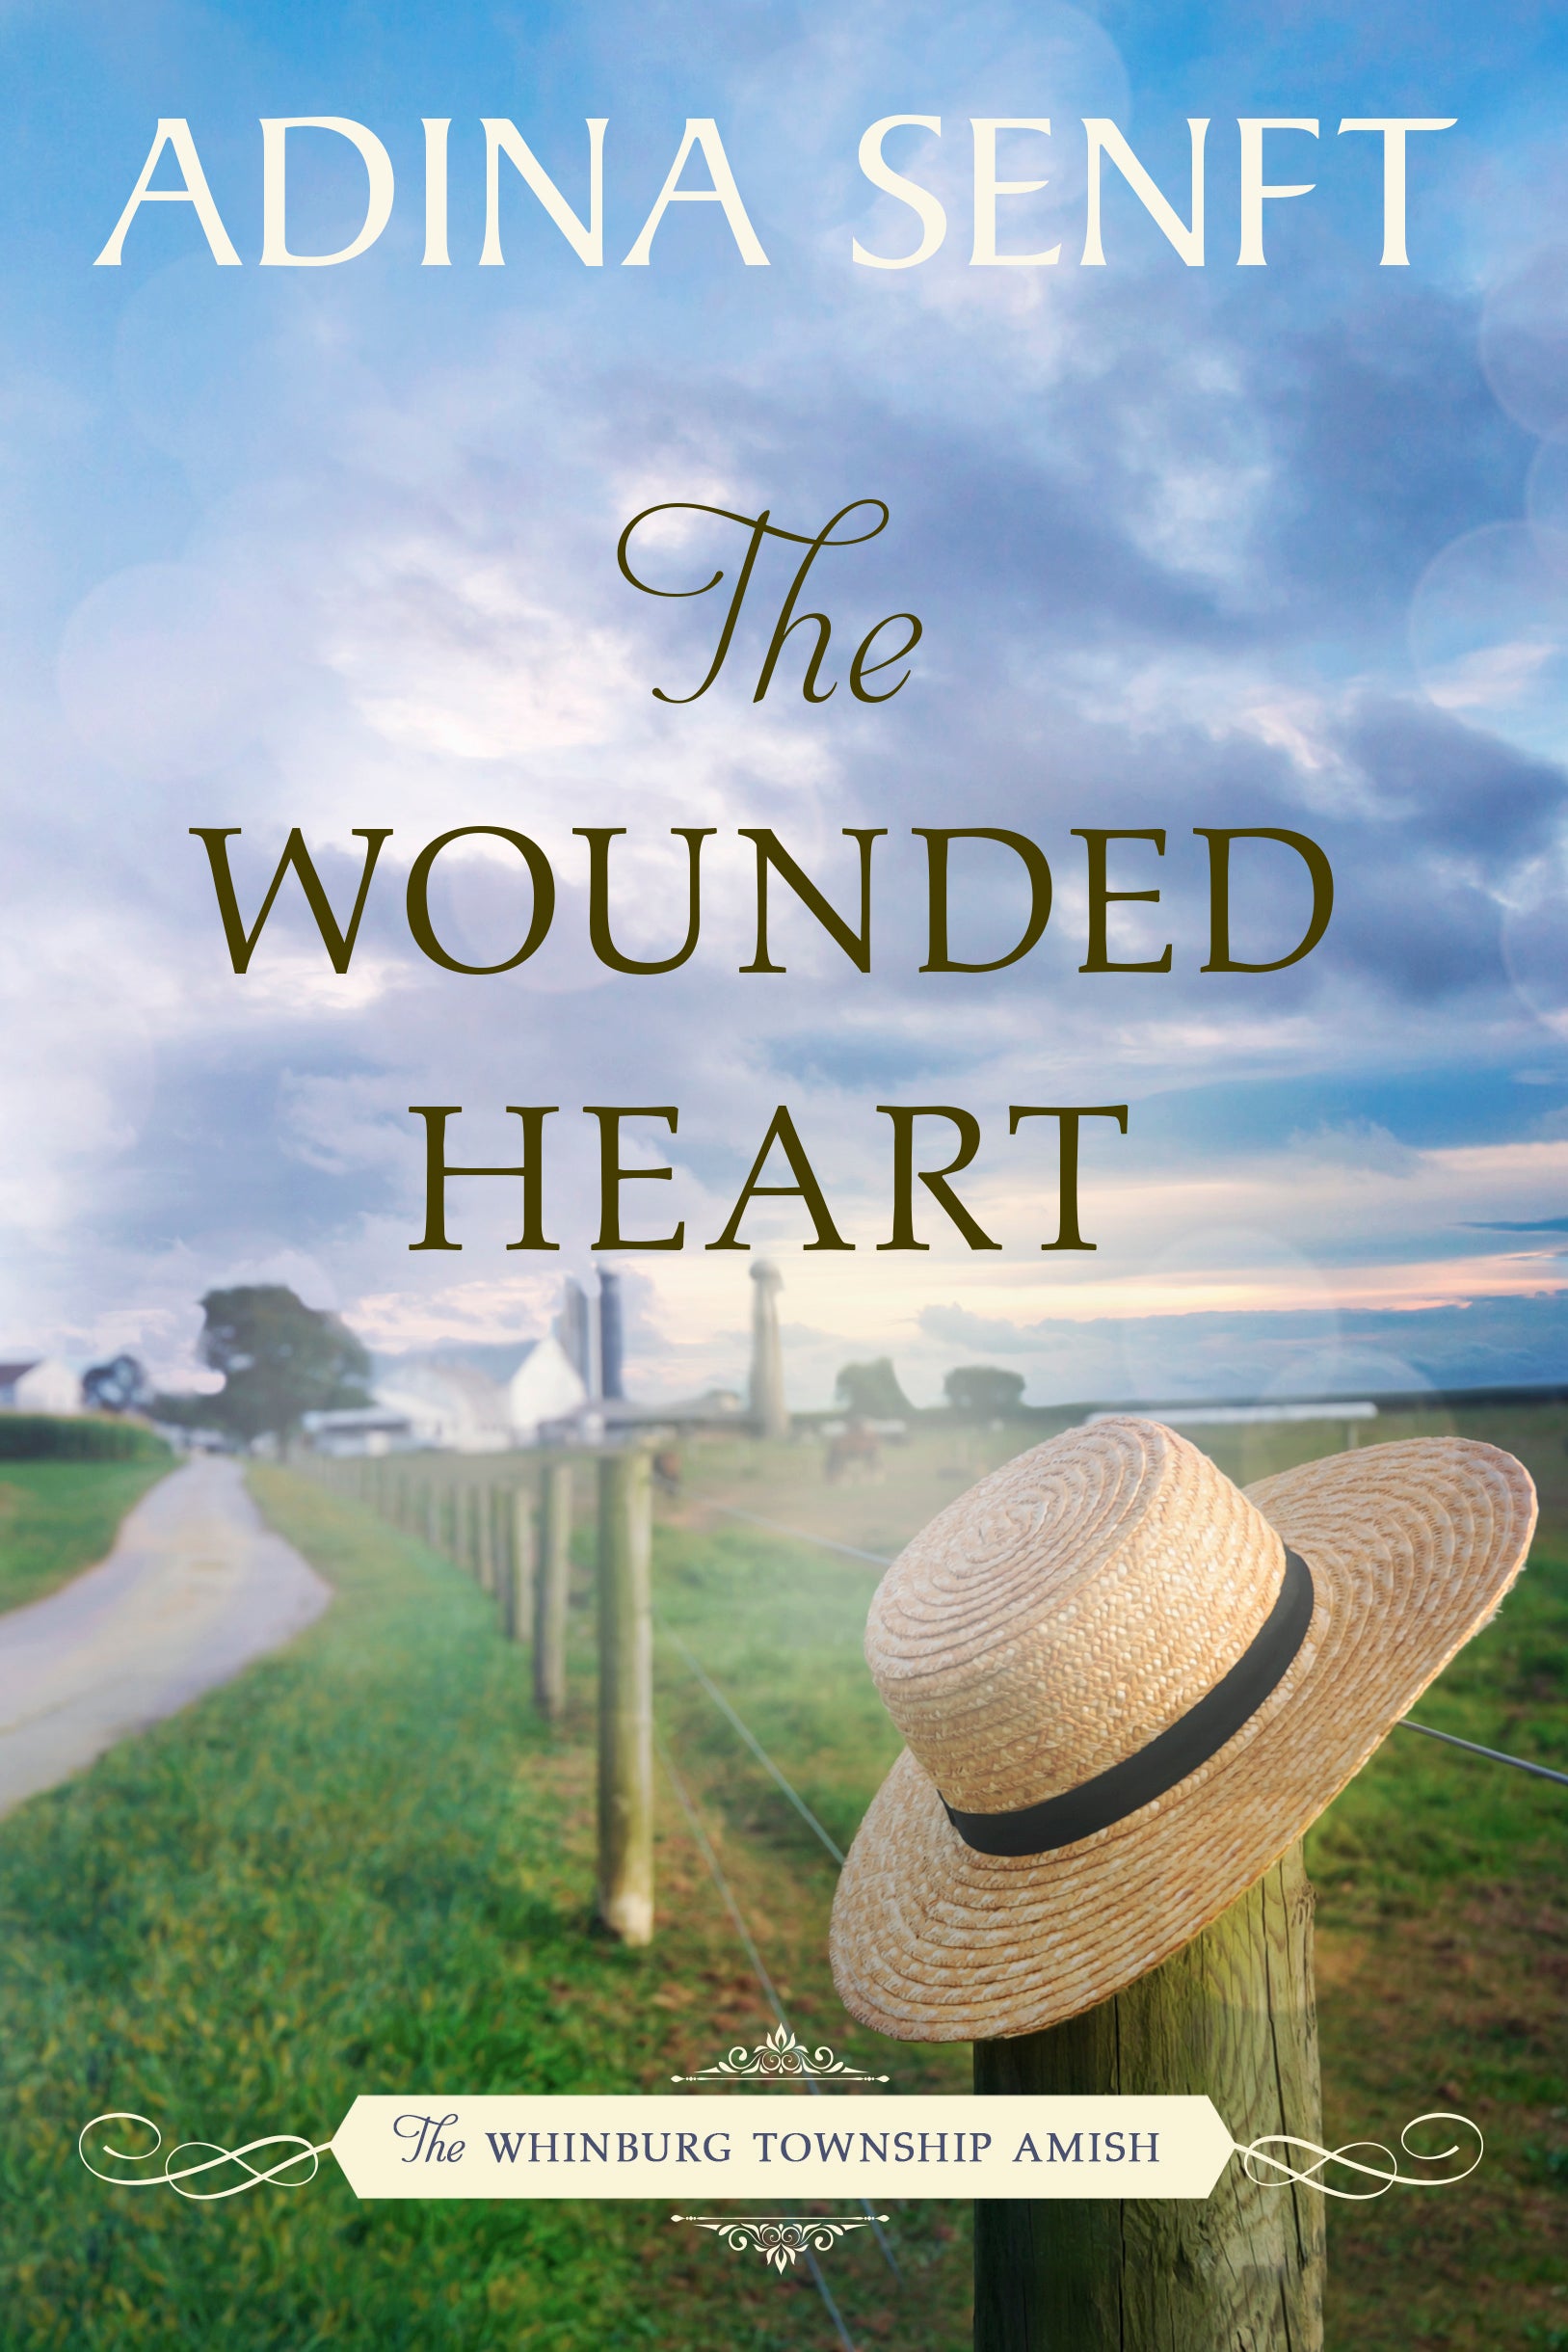 The Wounded Heart by Adina Senft, a Whinburg Township Amish women's fiction romance novel, first in series